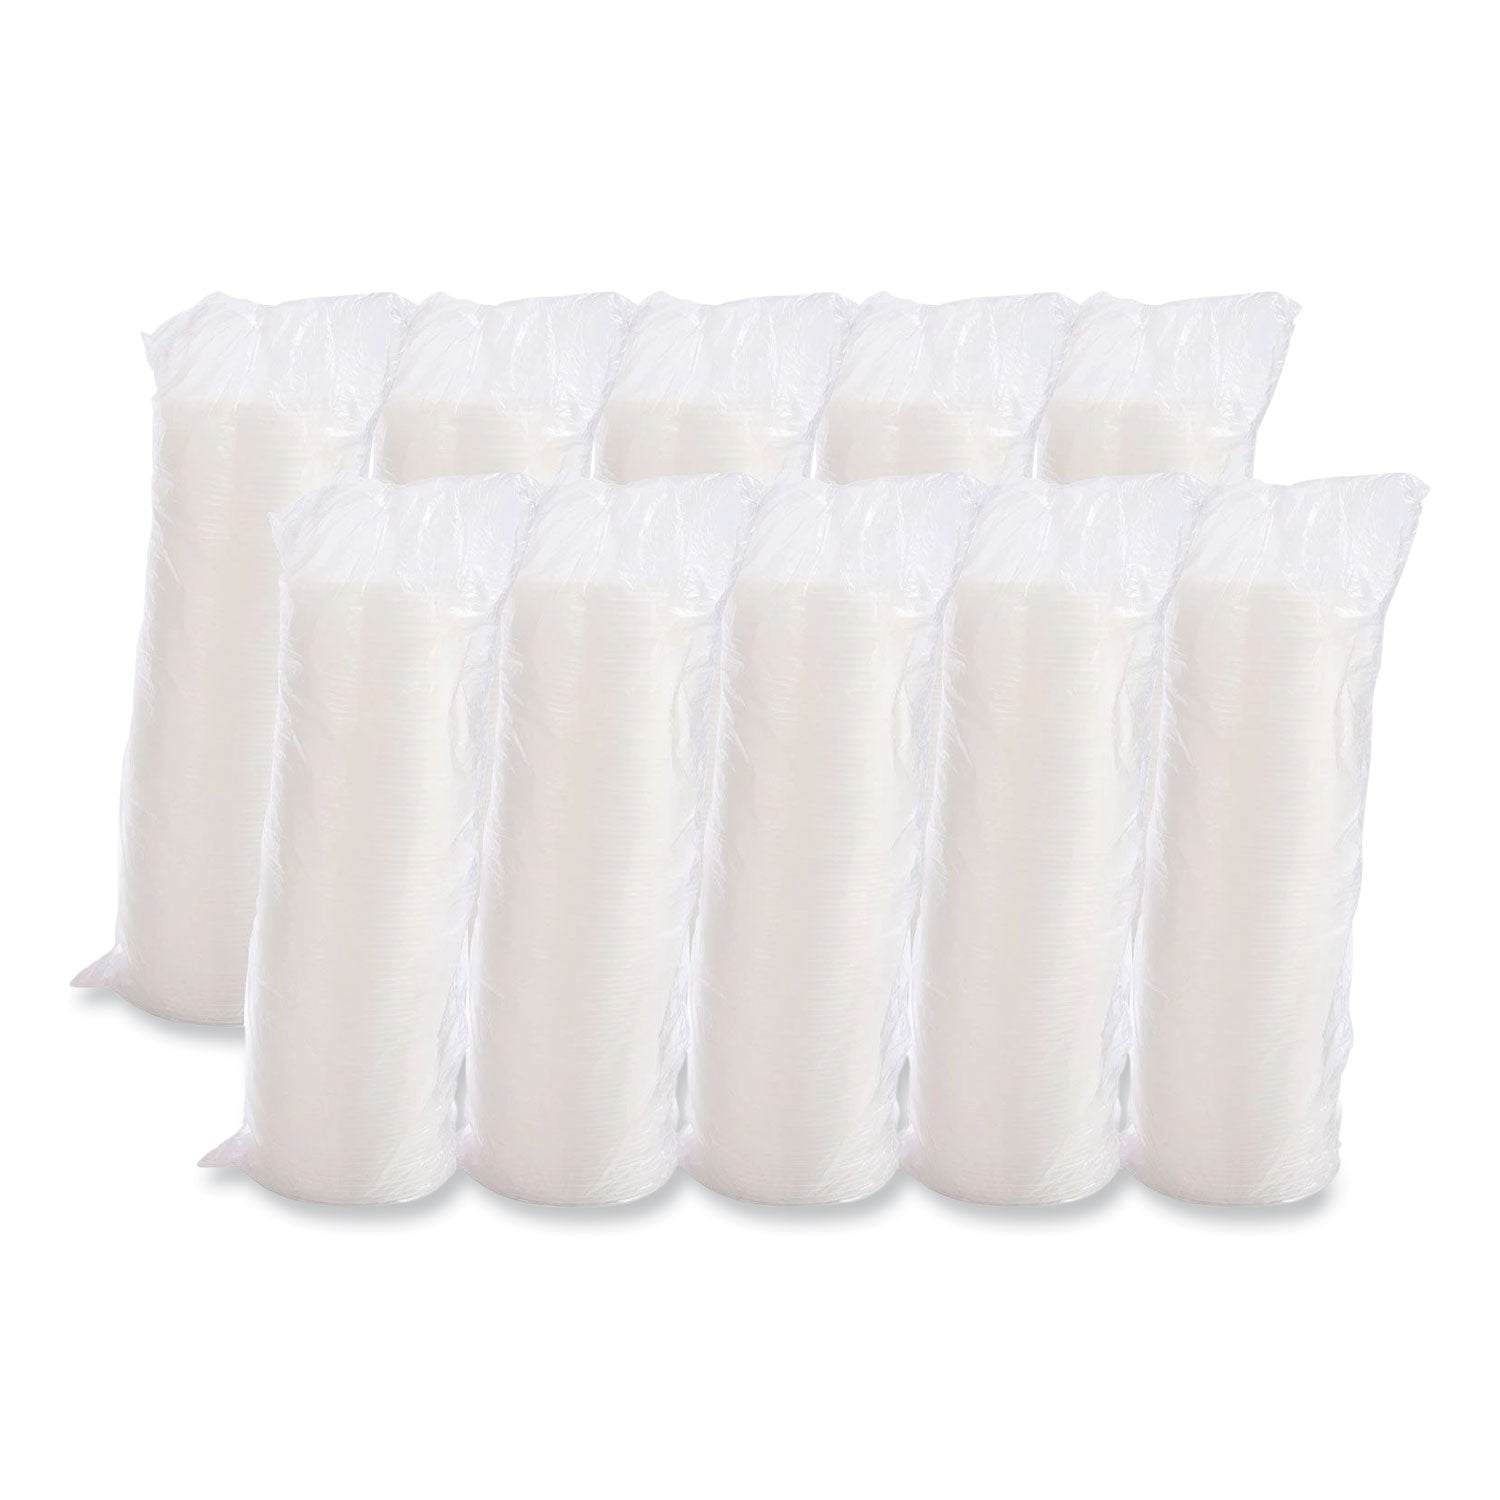 Cold Cup Lids, Fits 8 to 32 oz Cups/Containers, Translucent, 100/Sleeve, 10 Sleeves/Carton - 